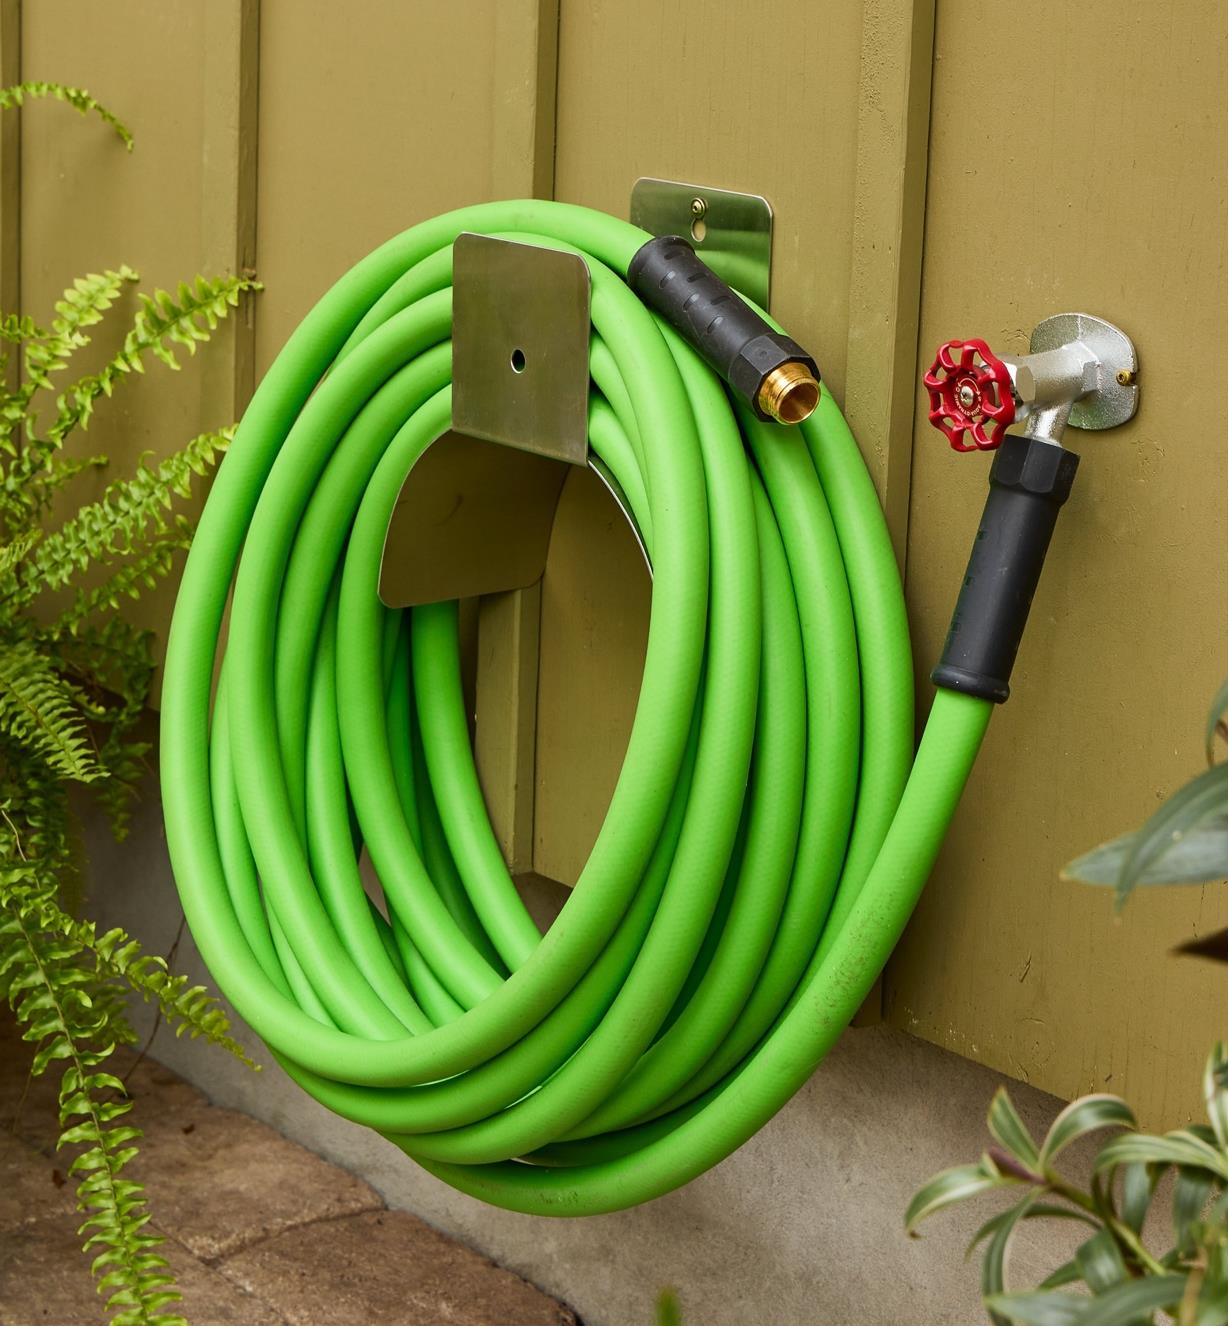 3/4" garden hose connected to an outdoor tap